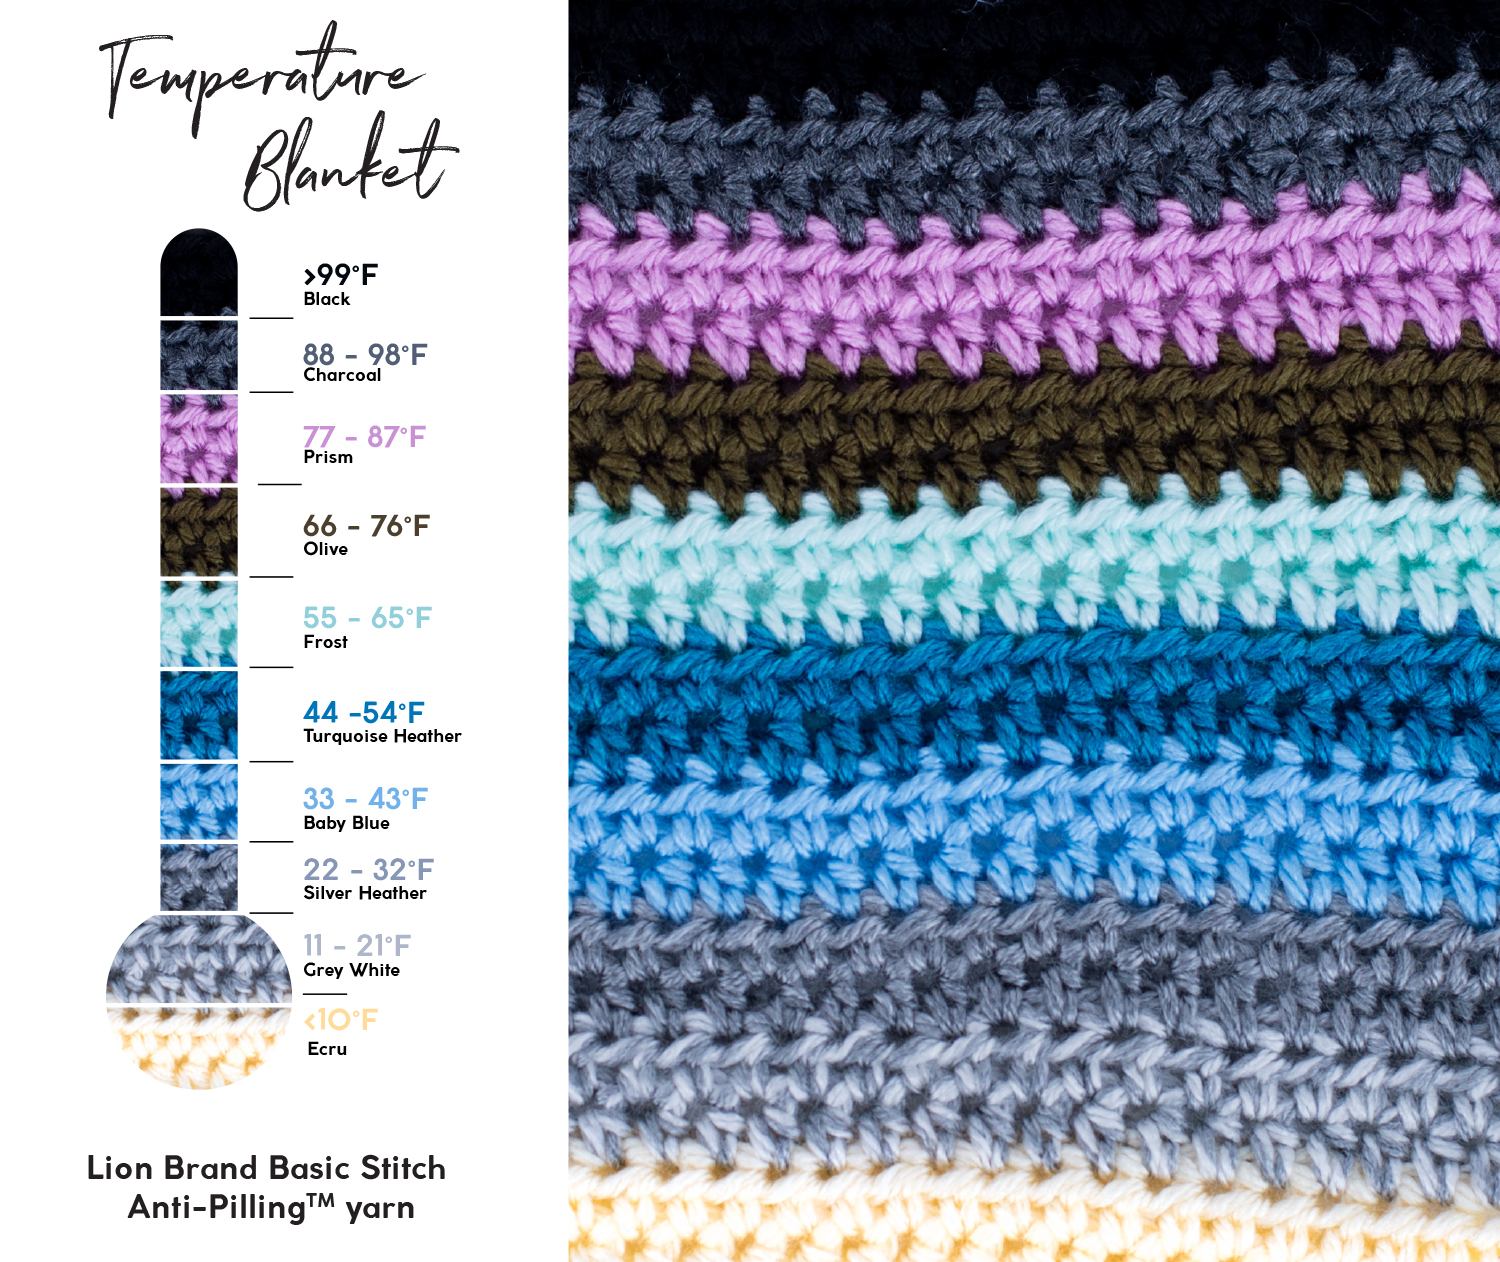 A Year In Yarn: How To Knit or Crochet A Temperature Blanket